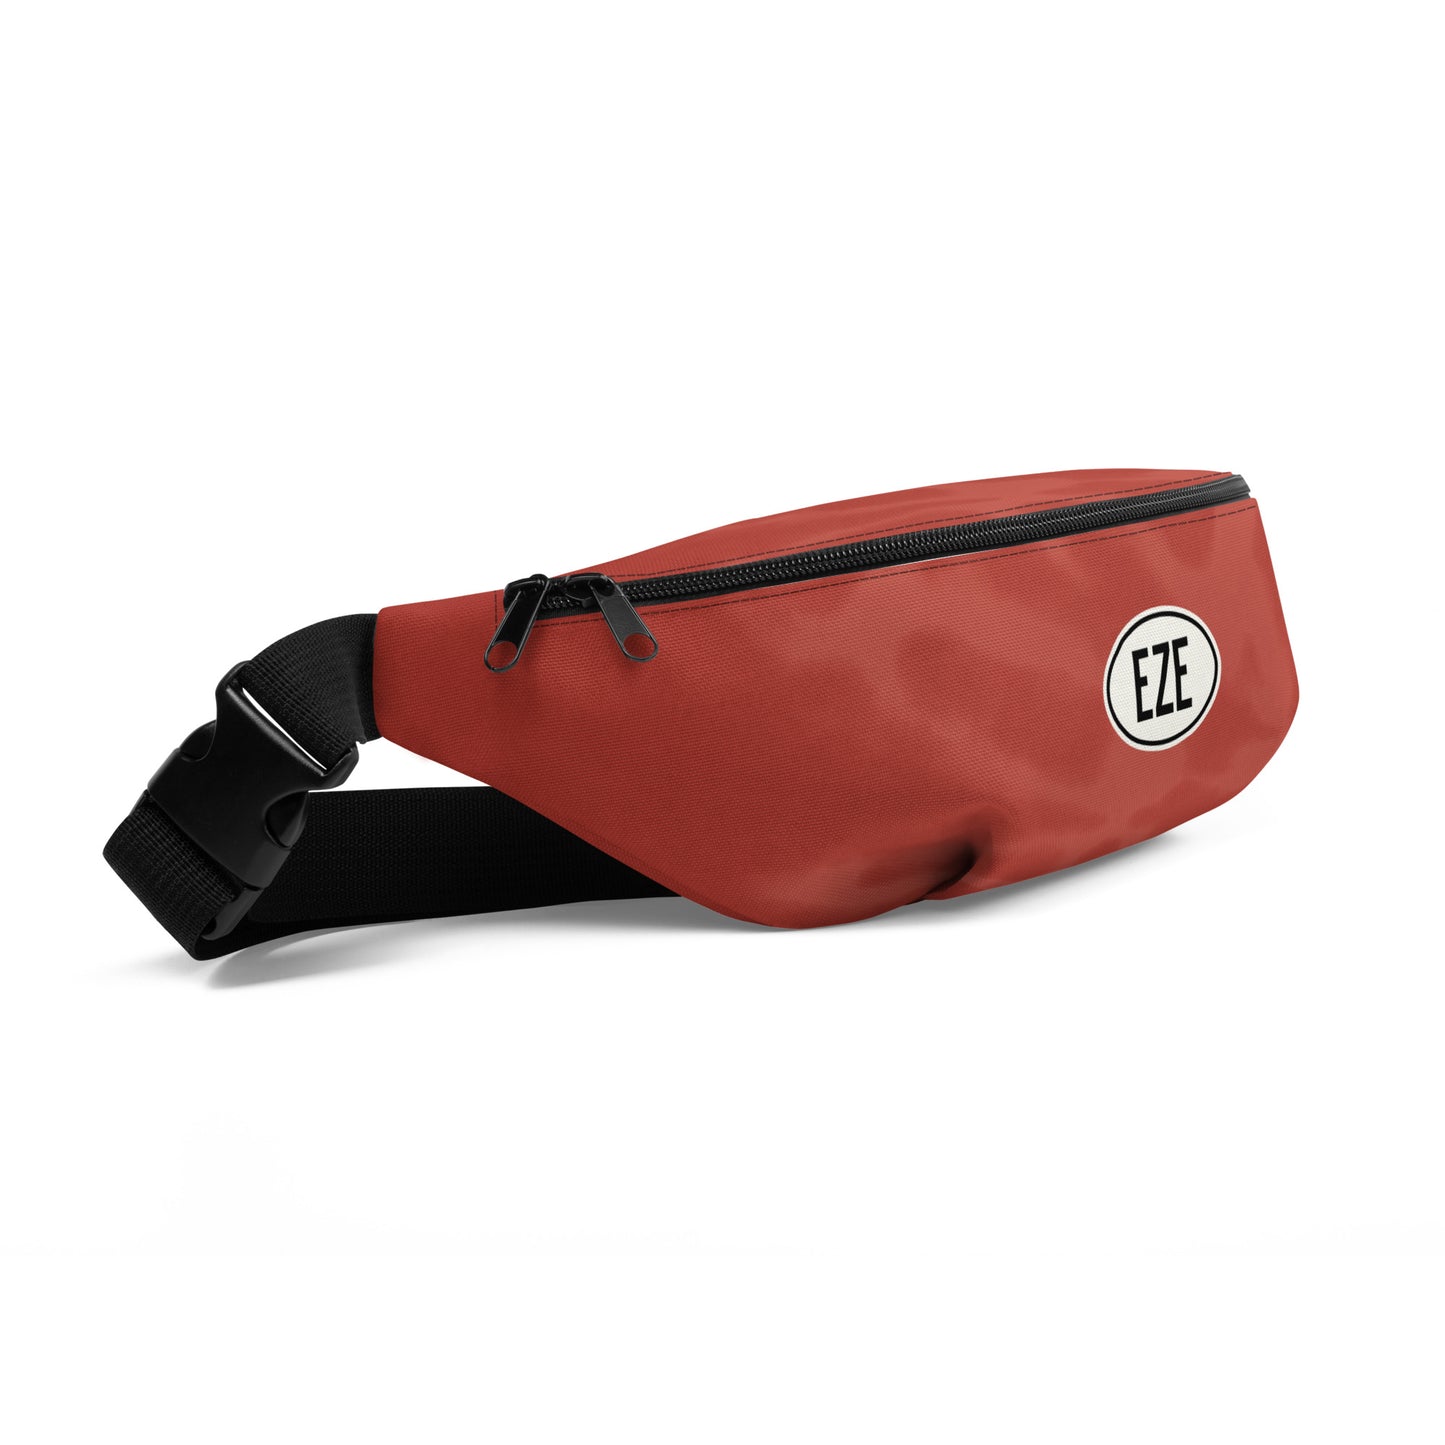 Travel Gift Fanny Pack - Red Tie-Dye • EZE Buenos Aires • YHM Designs - Image 07